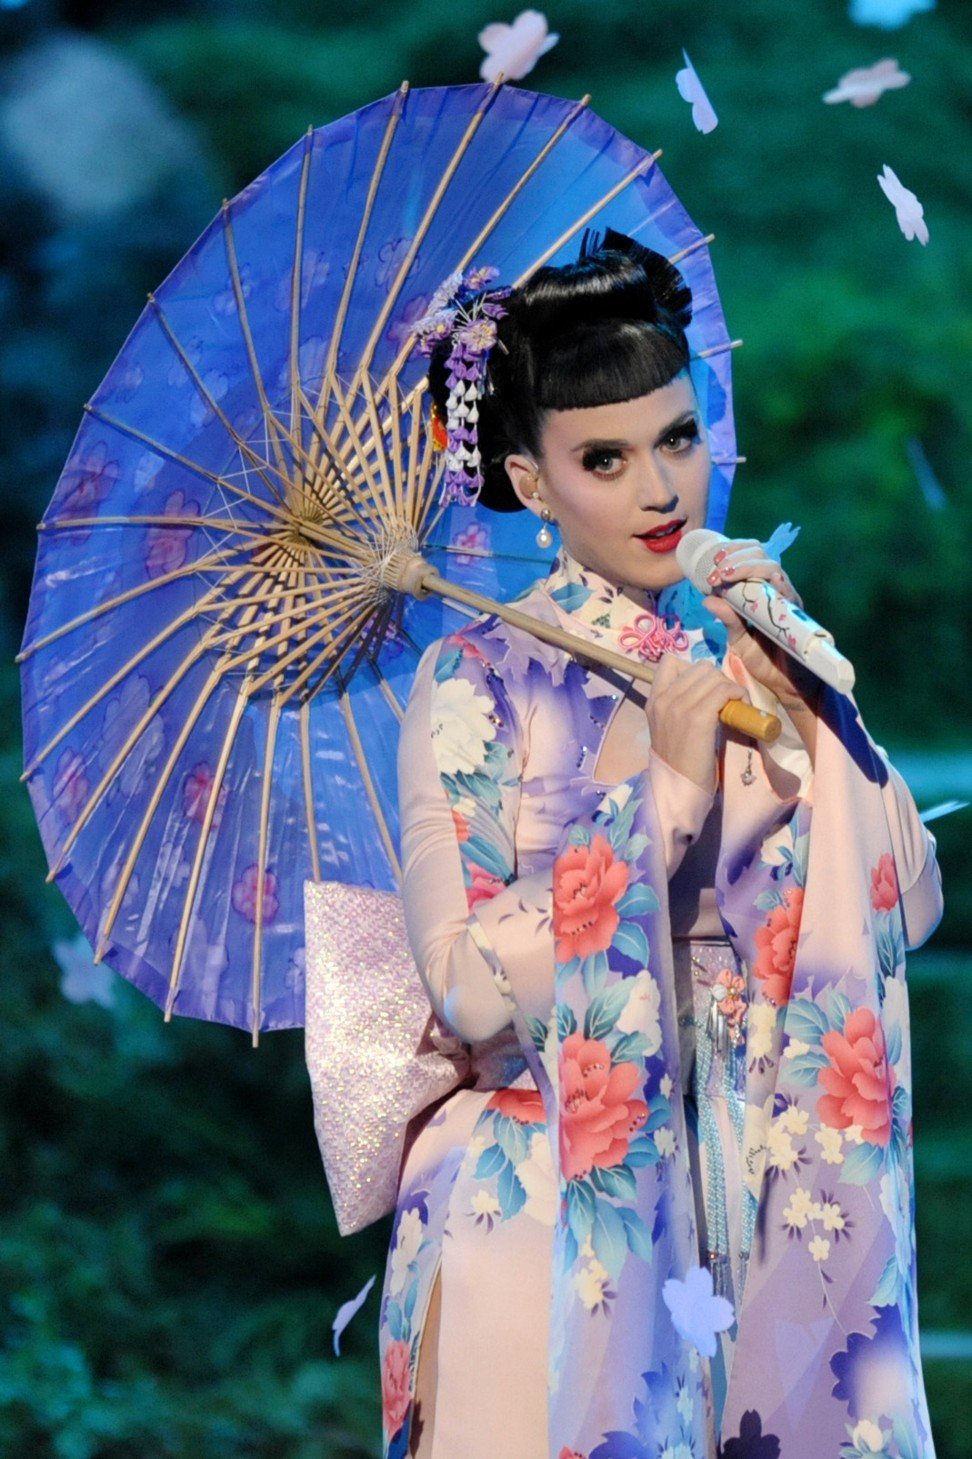 Katy Perry performs on stage at the American Music Awards dressed as a geisha. Photo: AP 